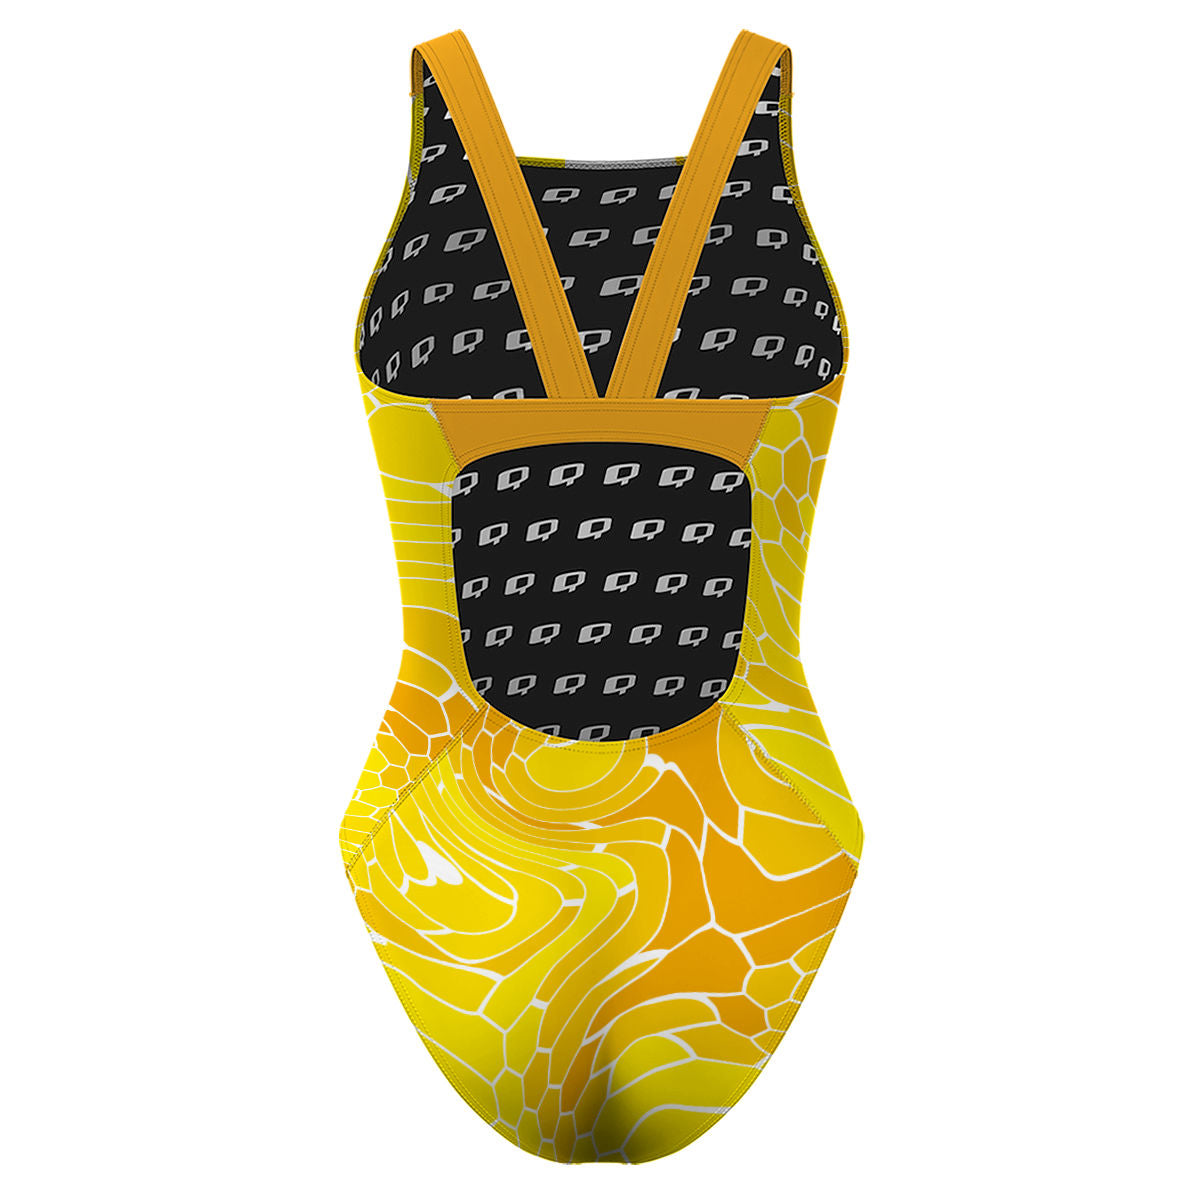 Trippy Beehive - Classic Strap Swimsuit